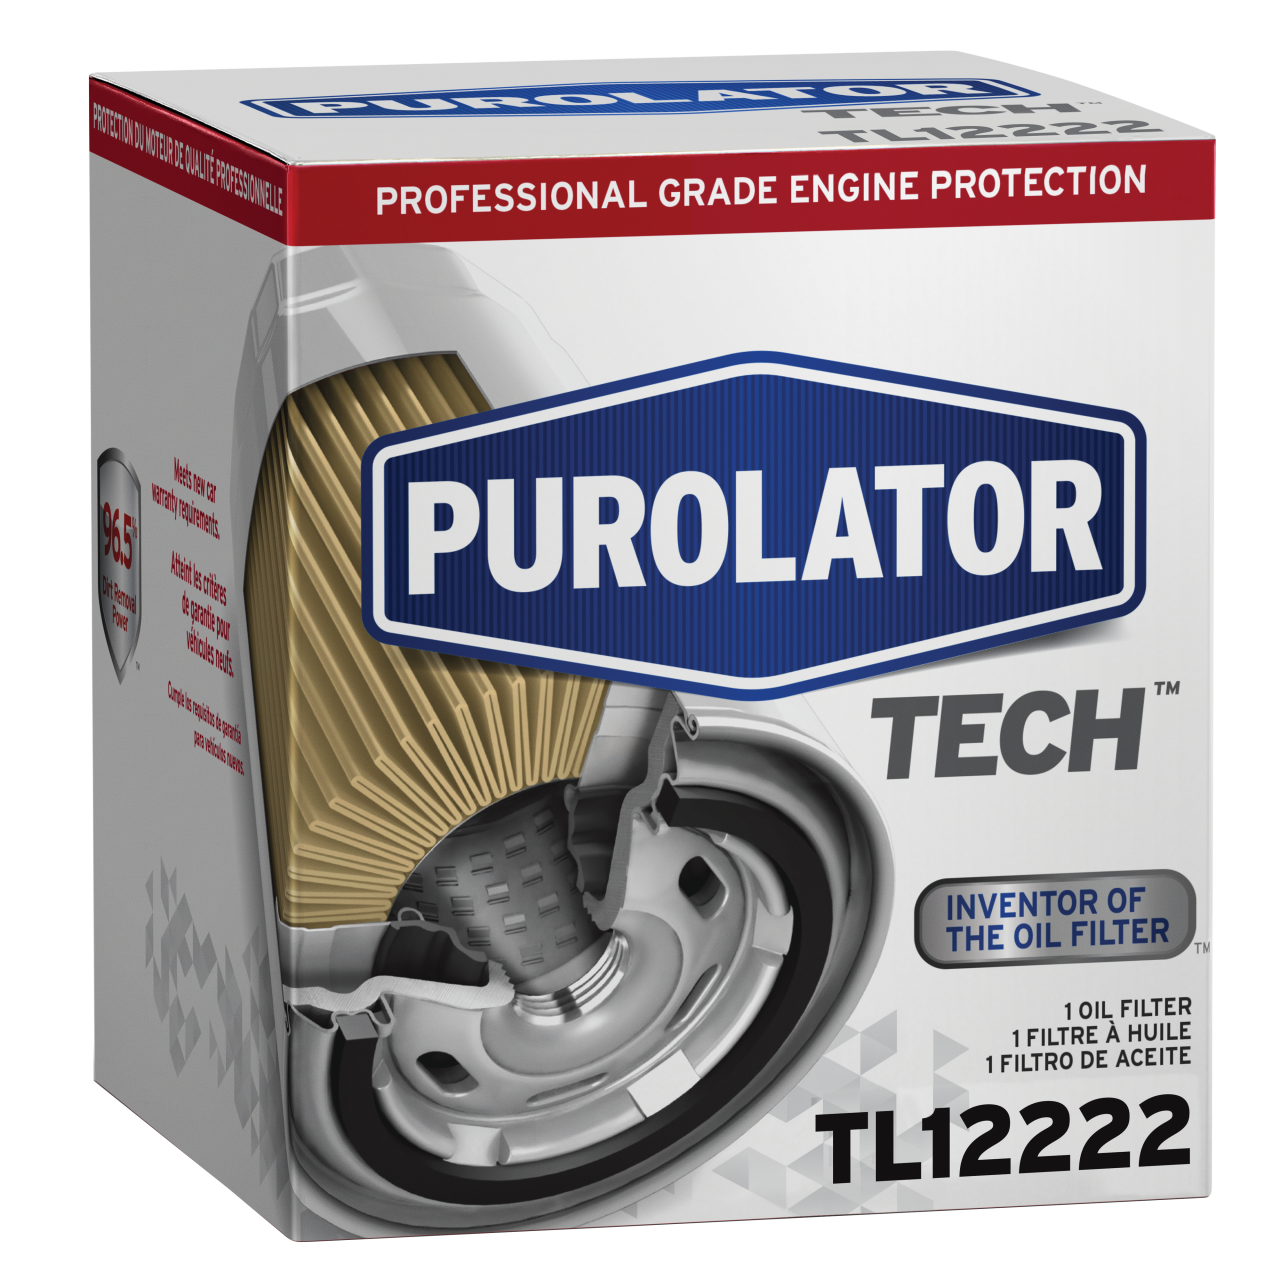 Plenty of the best auto experts trust PurolatorTECH™ Oil Filters for top-rated engine performance and protection.